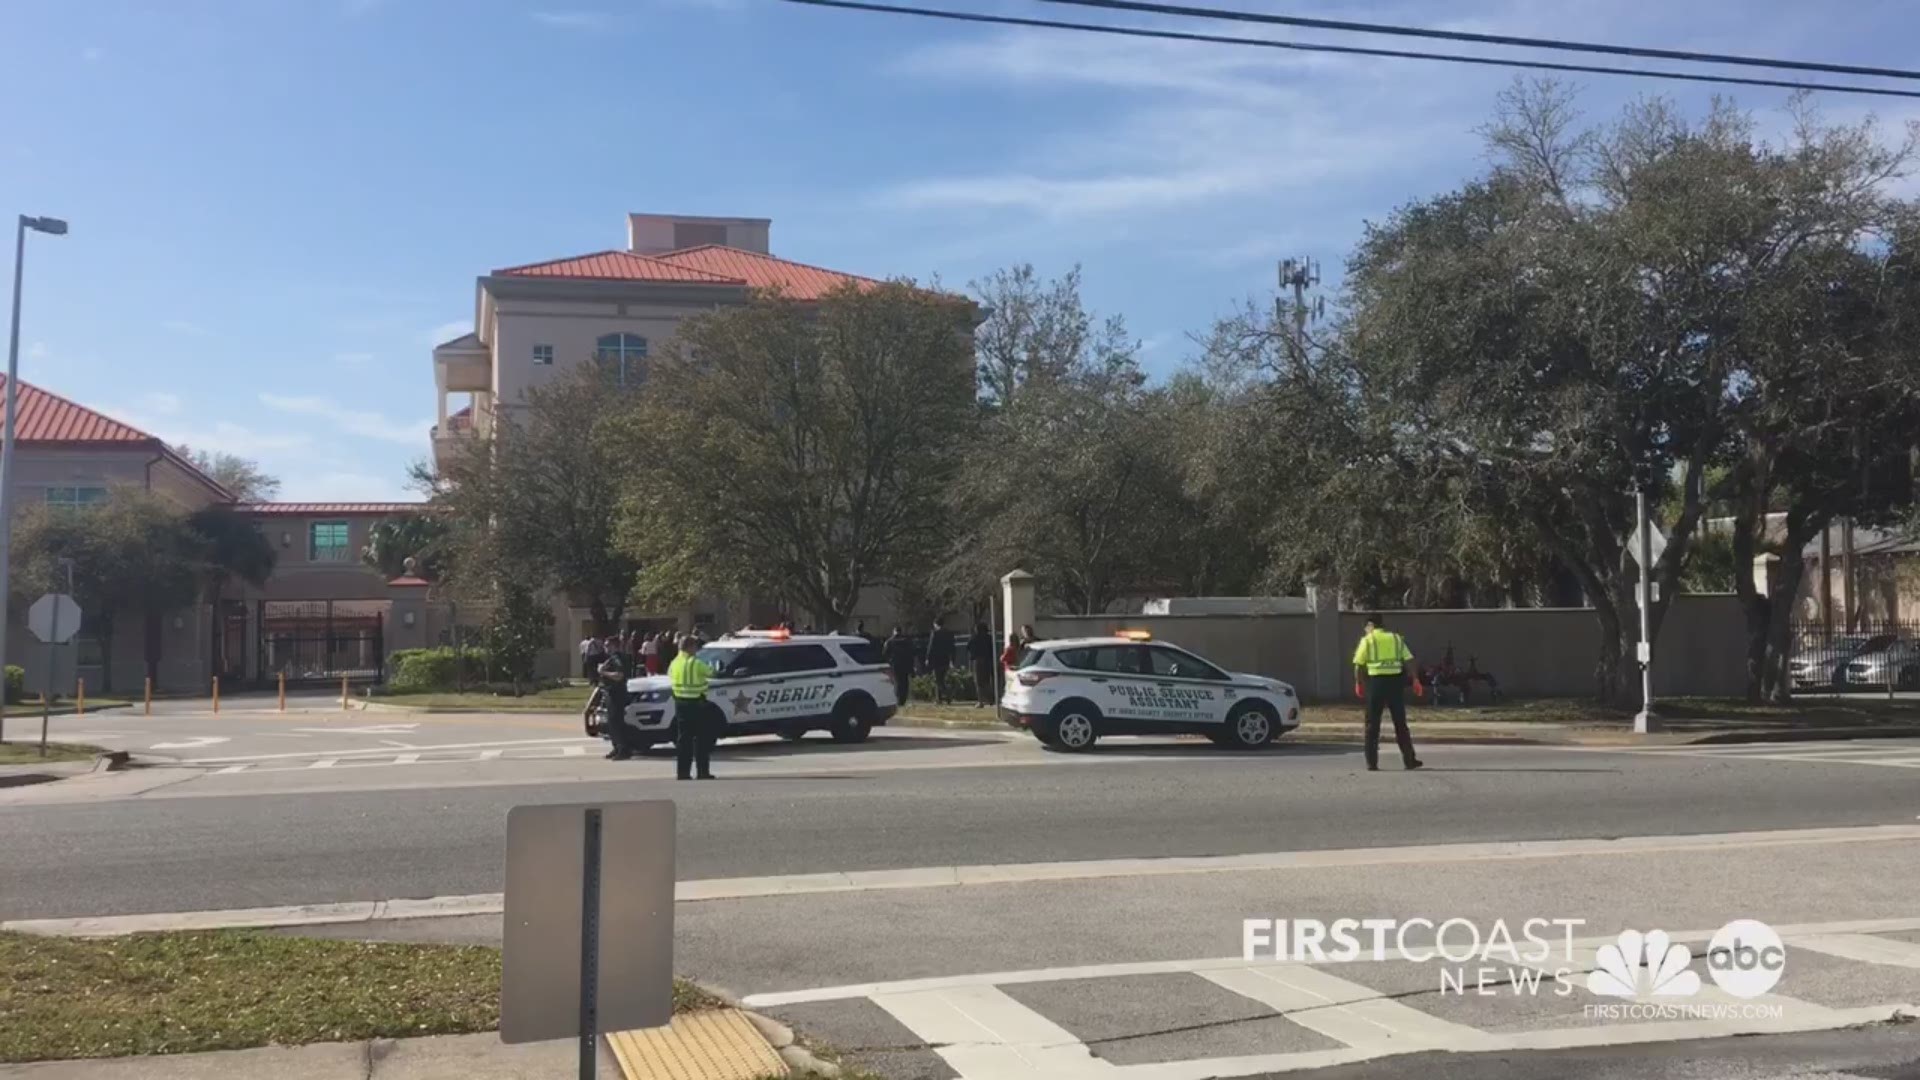 The St. Johns County Courthouse evacuation has now been cleared after an anonymous bomb threat call.